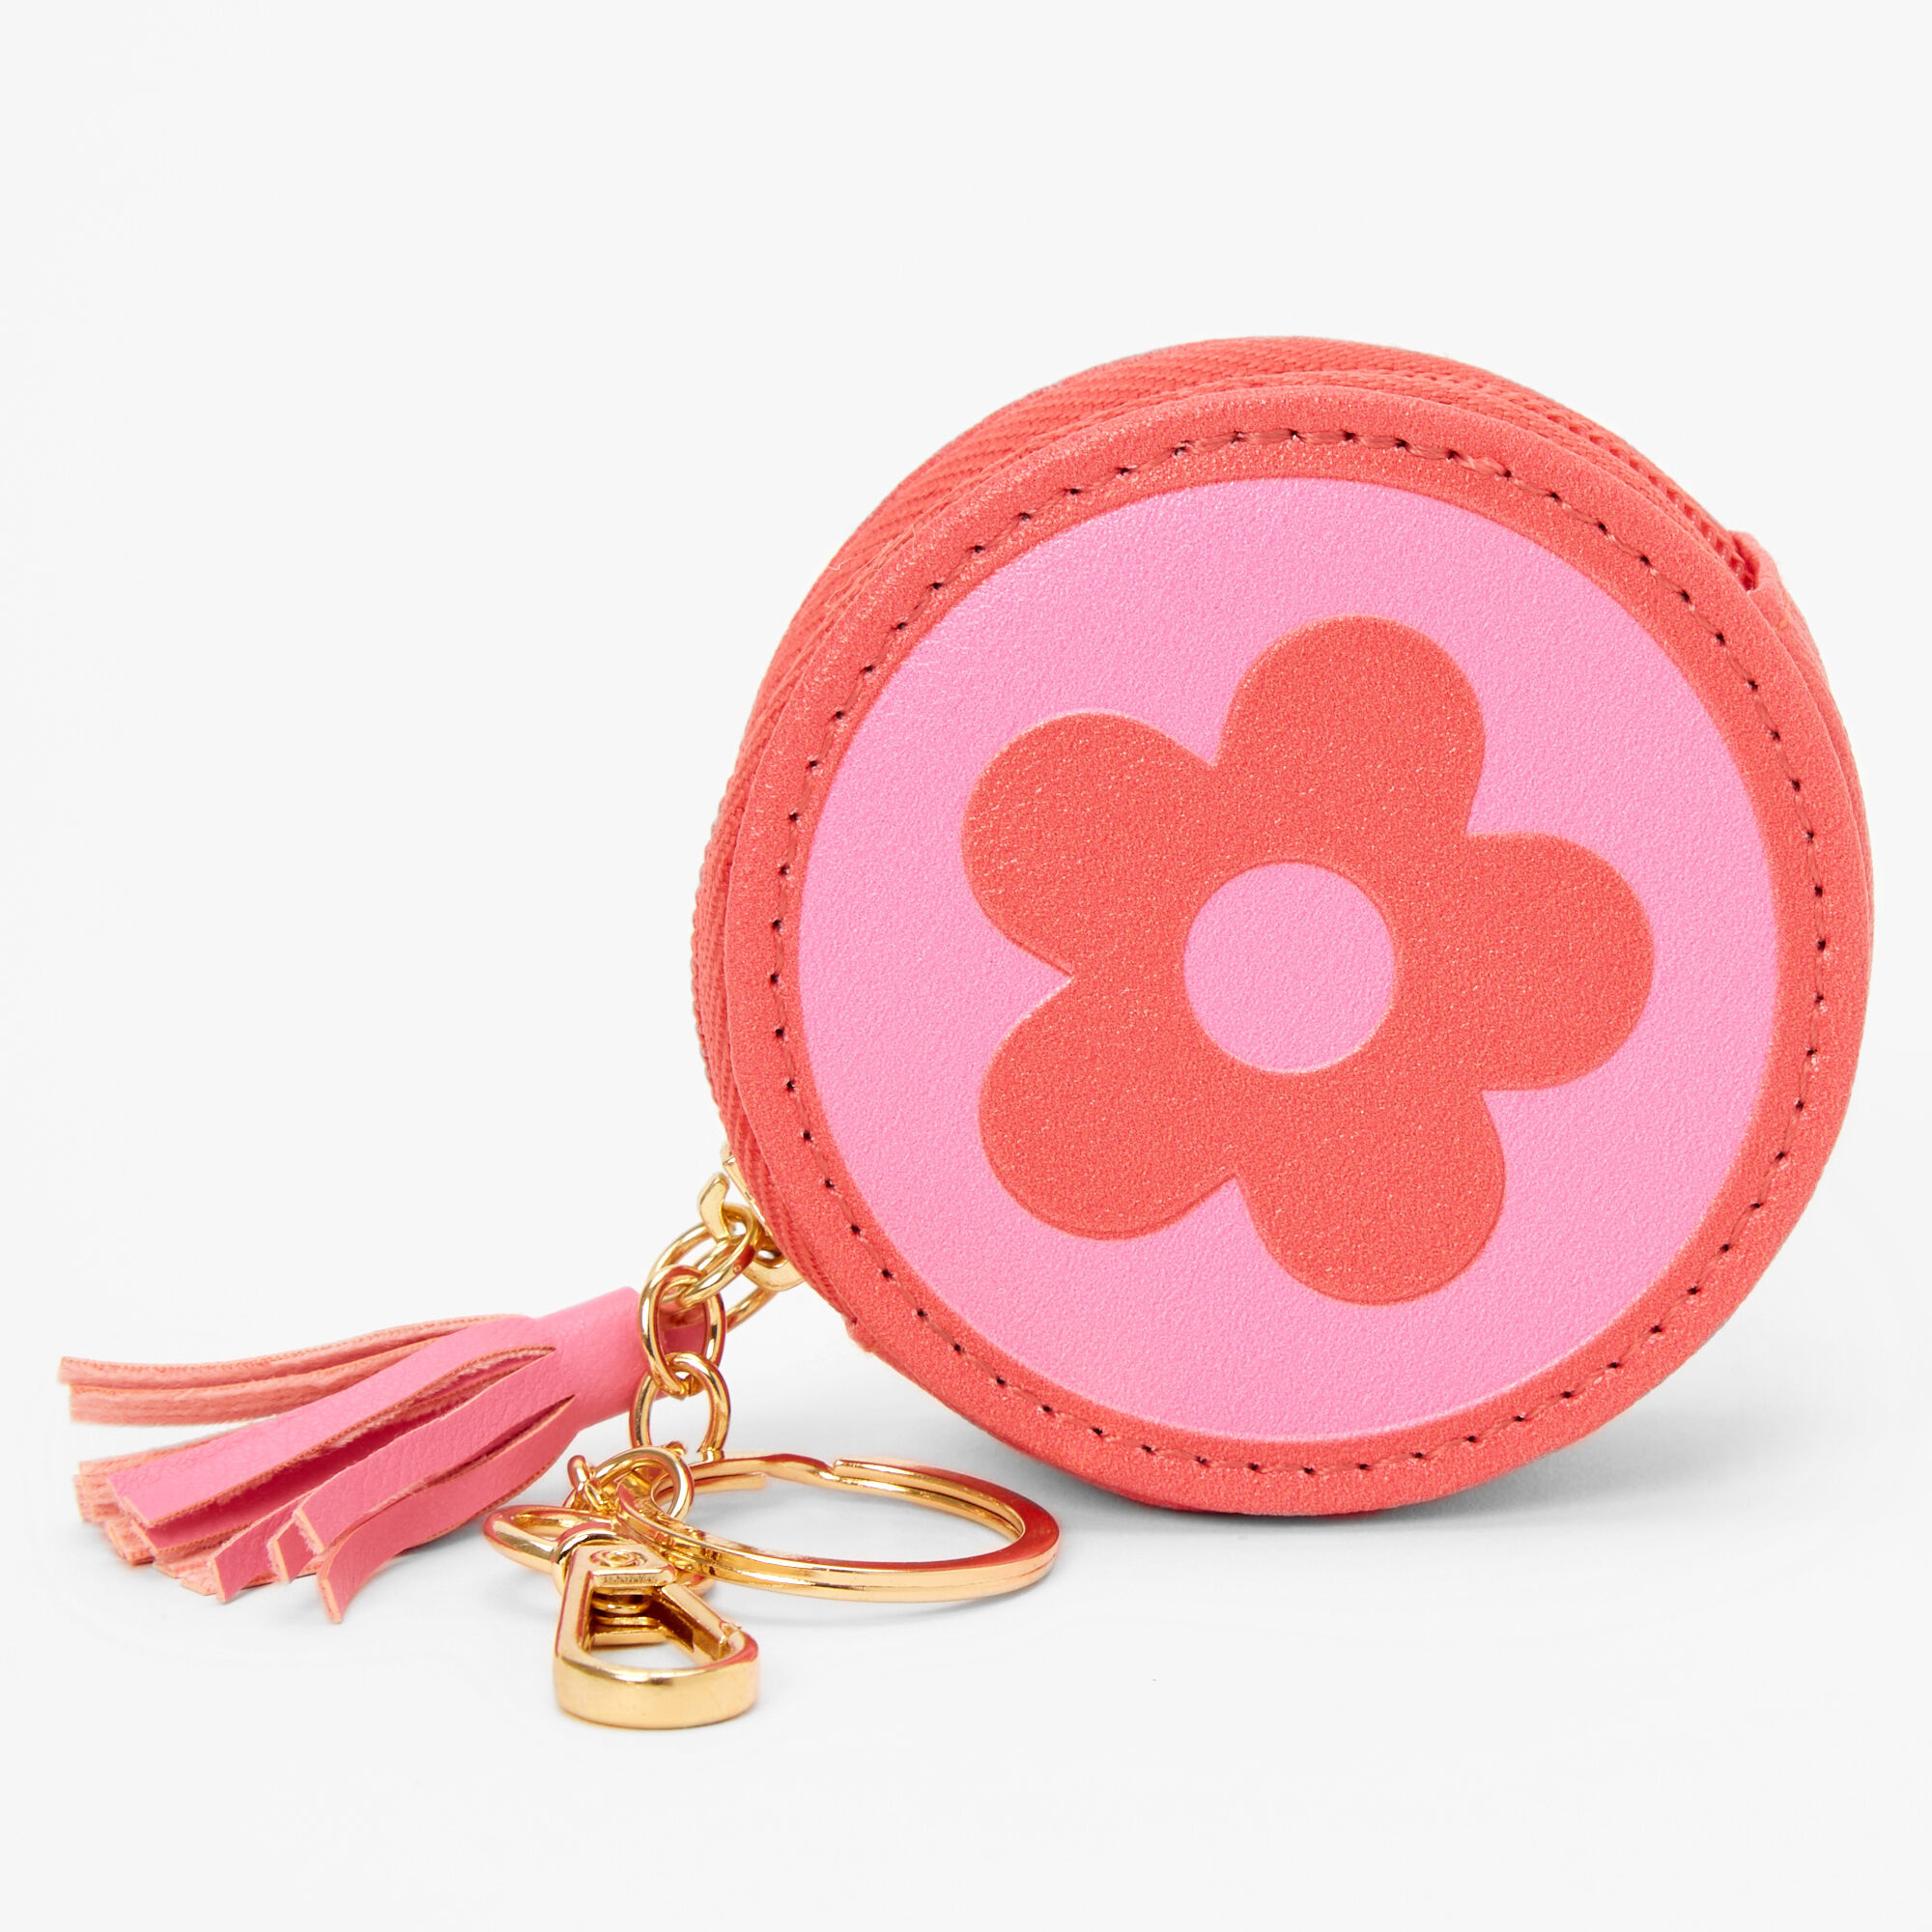 Buy Leather Coin Purse with Hand Painted Design, Round Shape Wallet for  Womens 3 pcs Combo Set (Colours May Vary) at Amazon.in